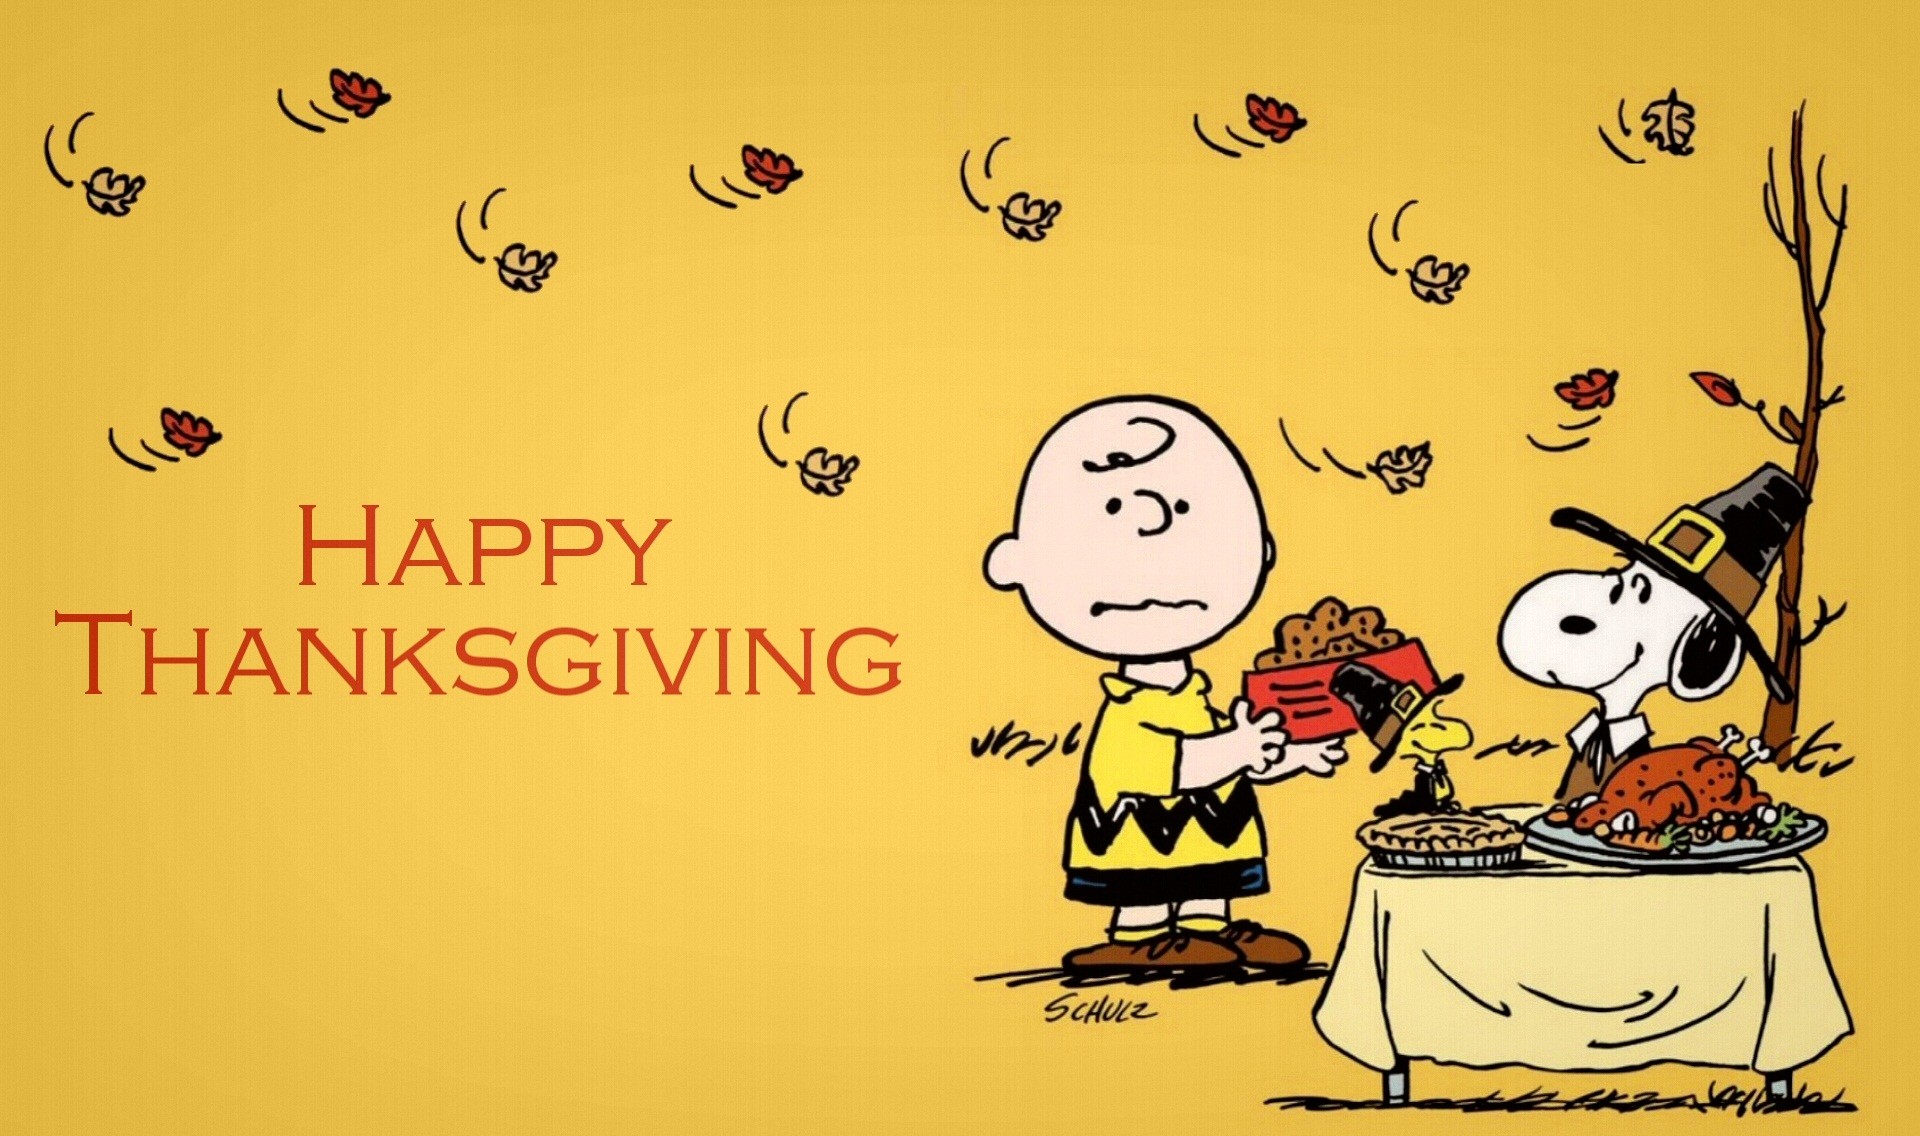 Snoopy Winter Wallpapers Thanksgiving Snoopy Wallpapers